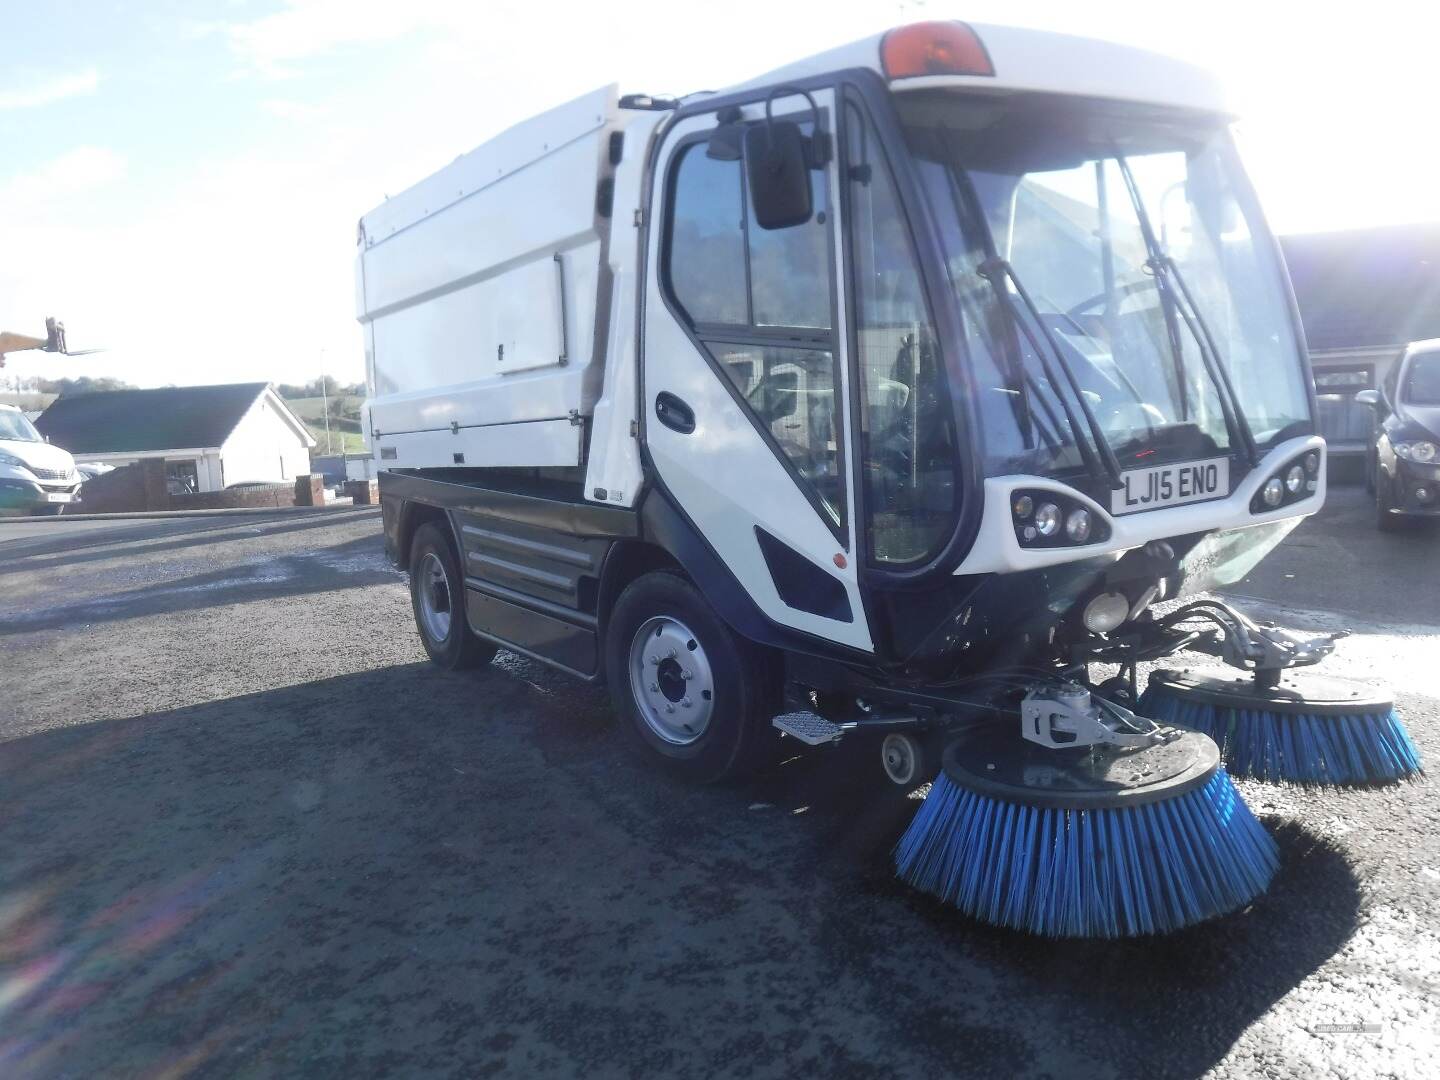 Johnstons CR400 Road Sweeper - power washer - gully sucker . in Down